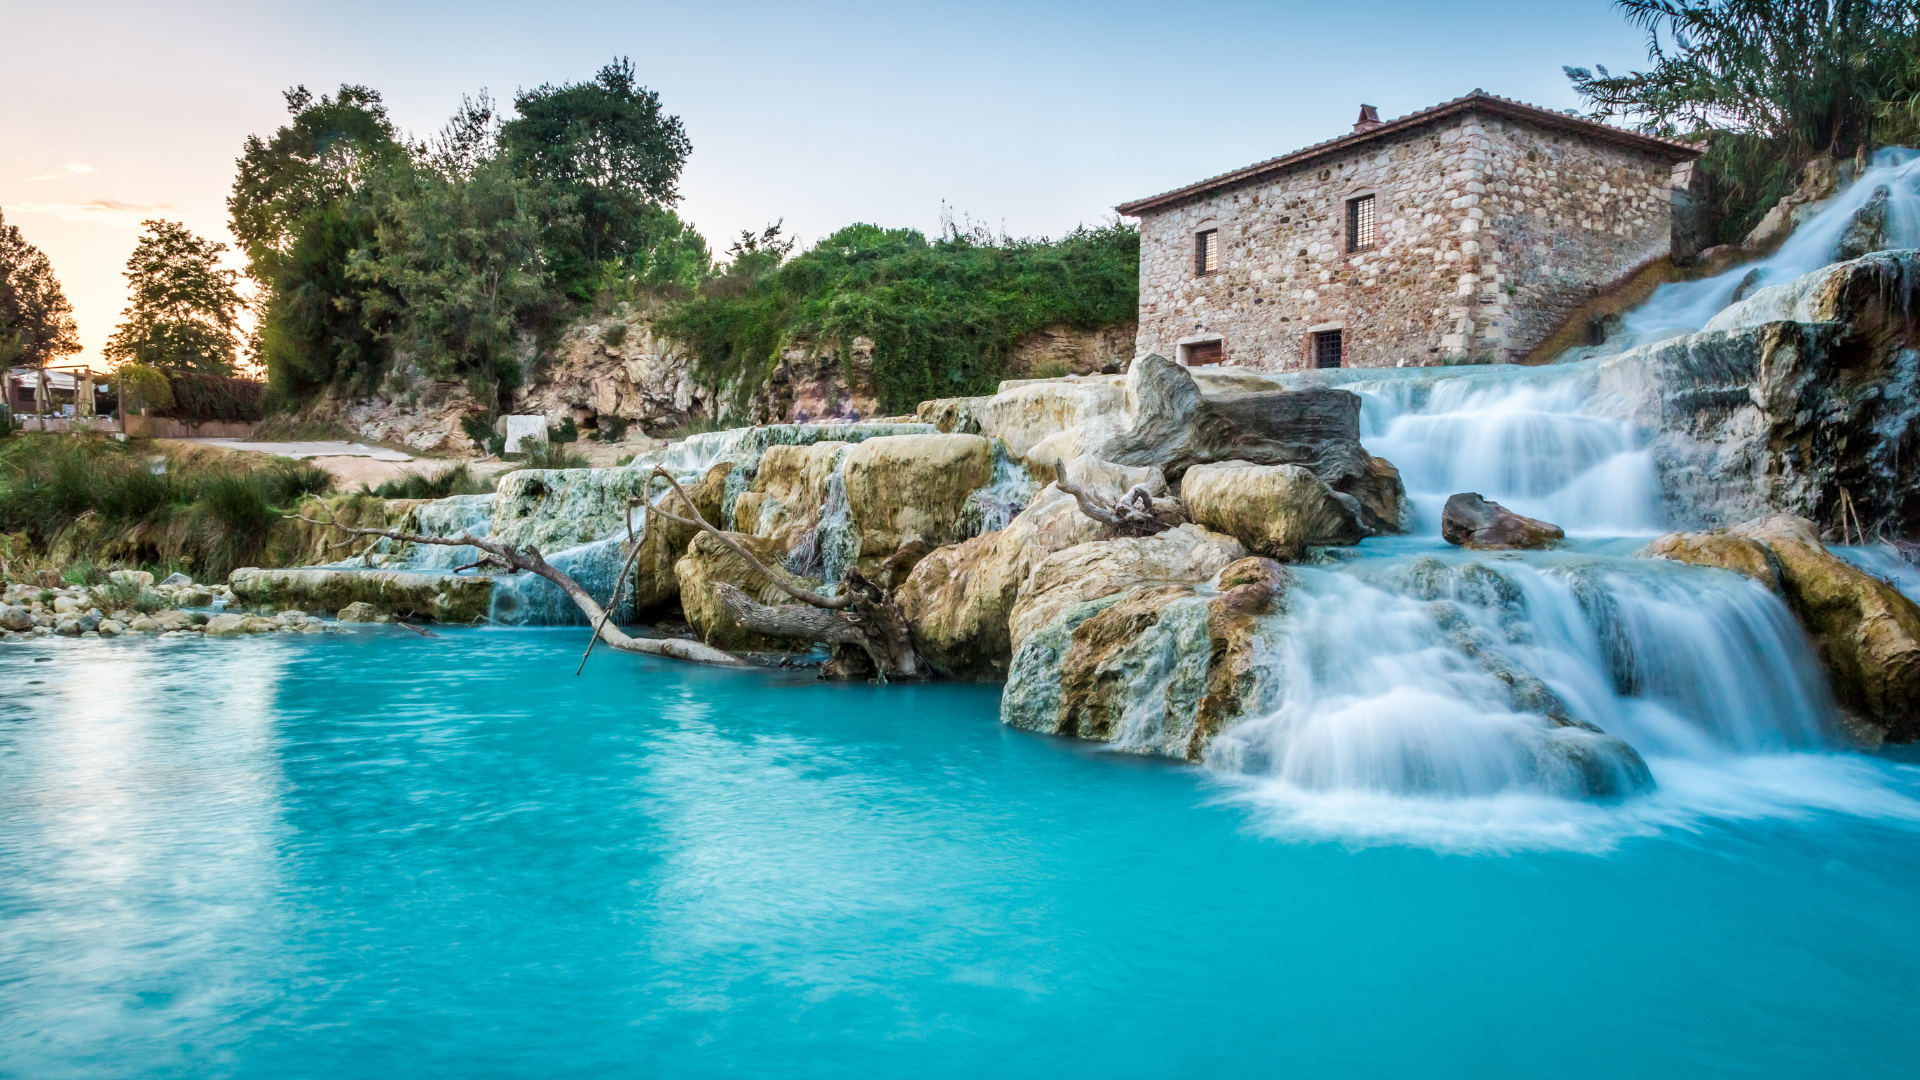 Pictures of most alluring hot springs that will make your day